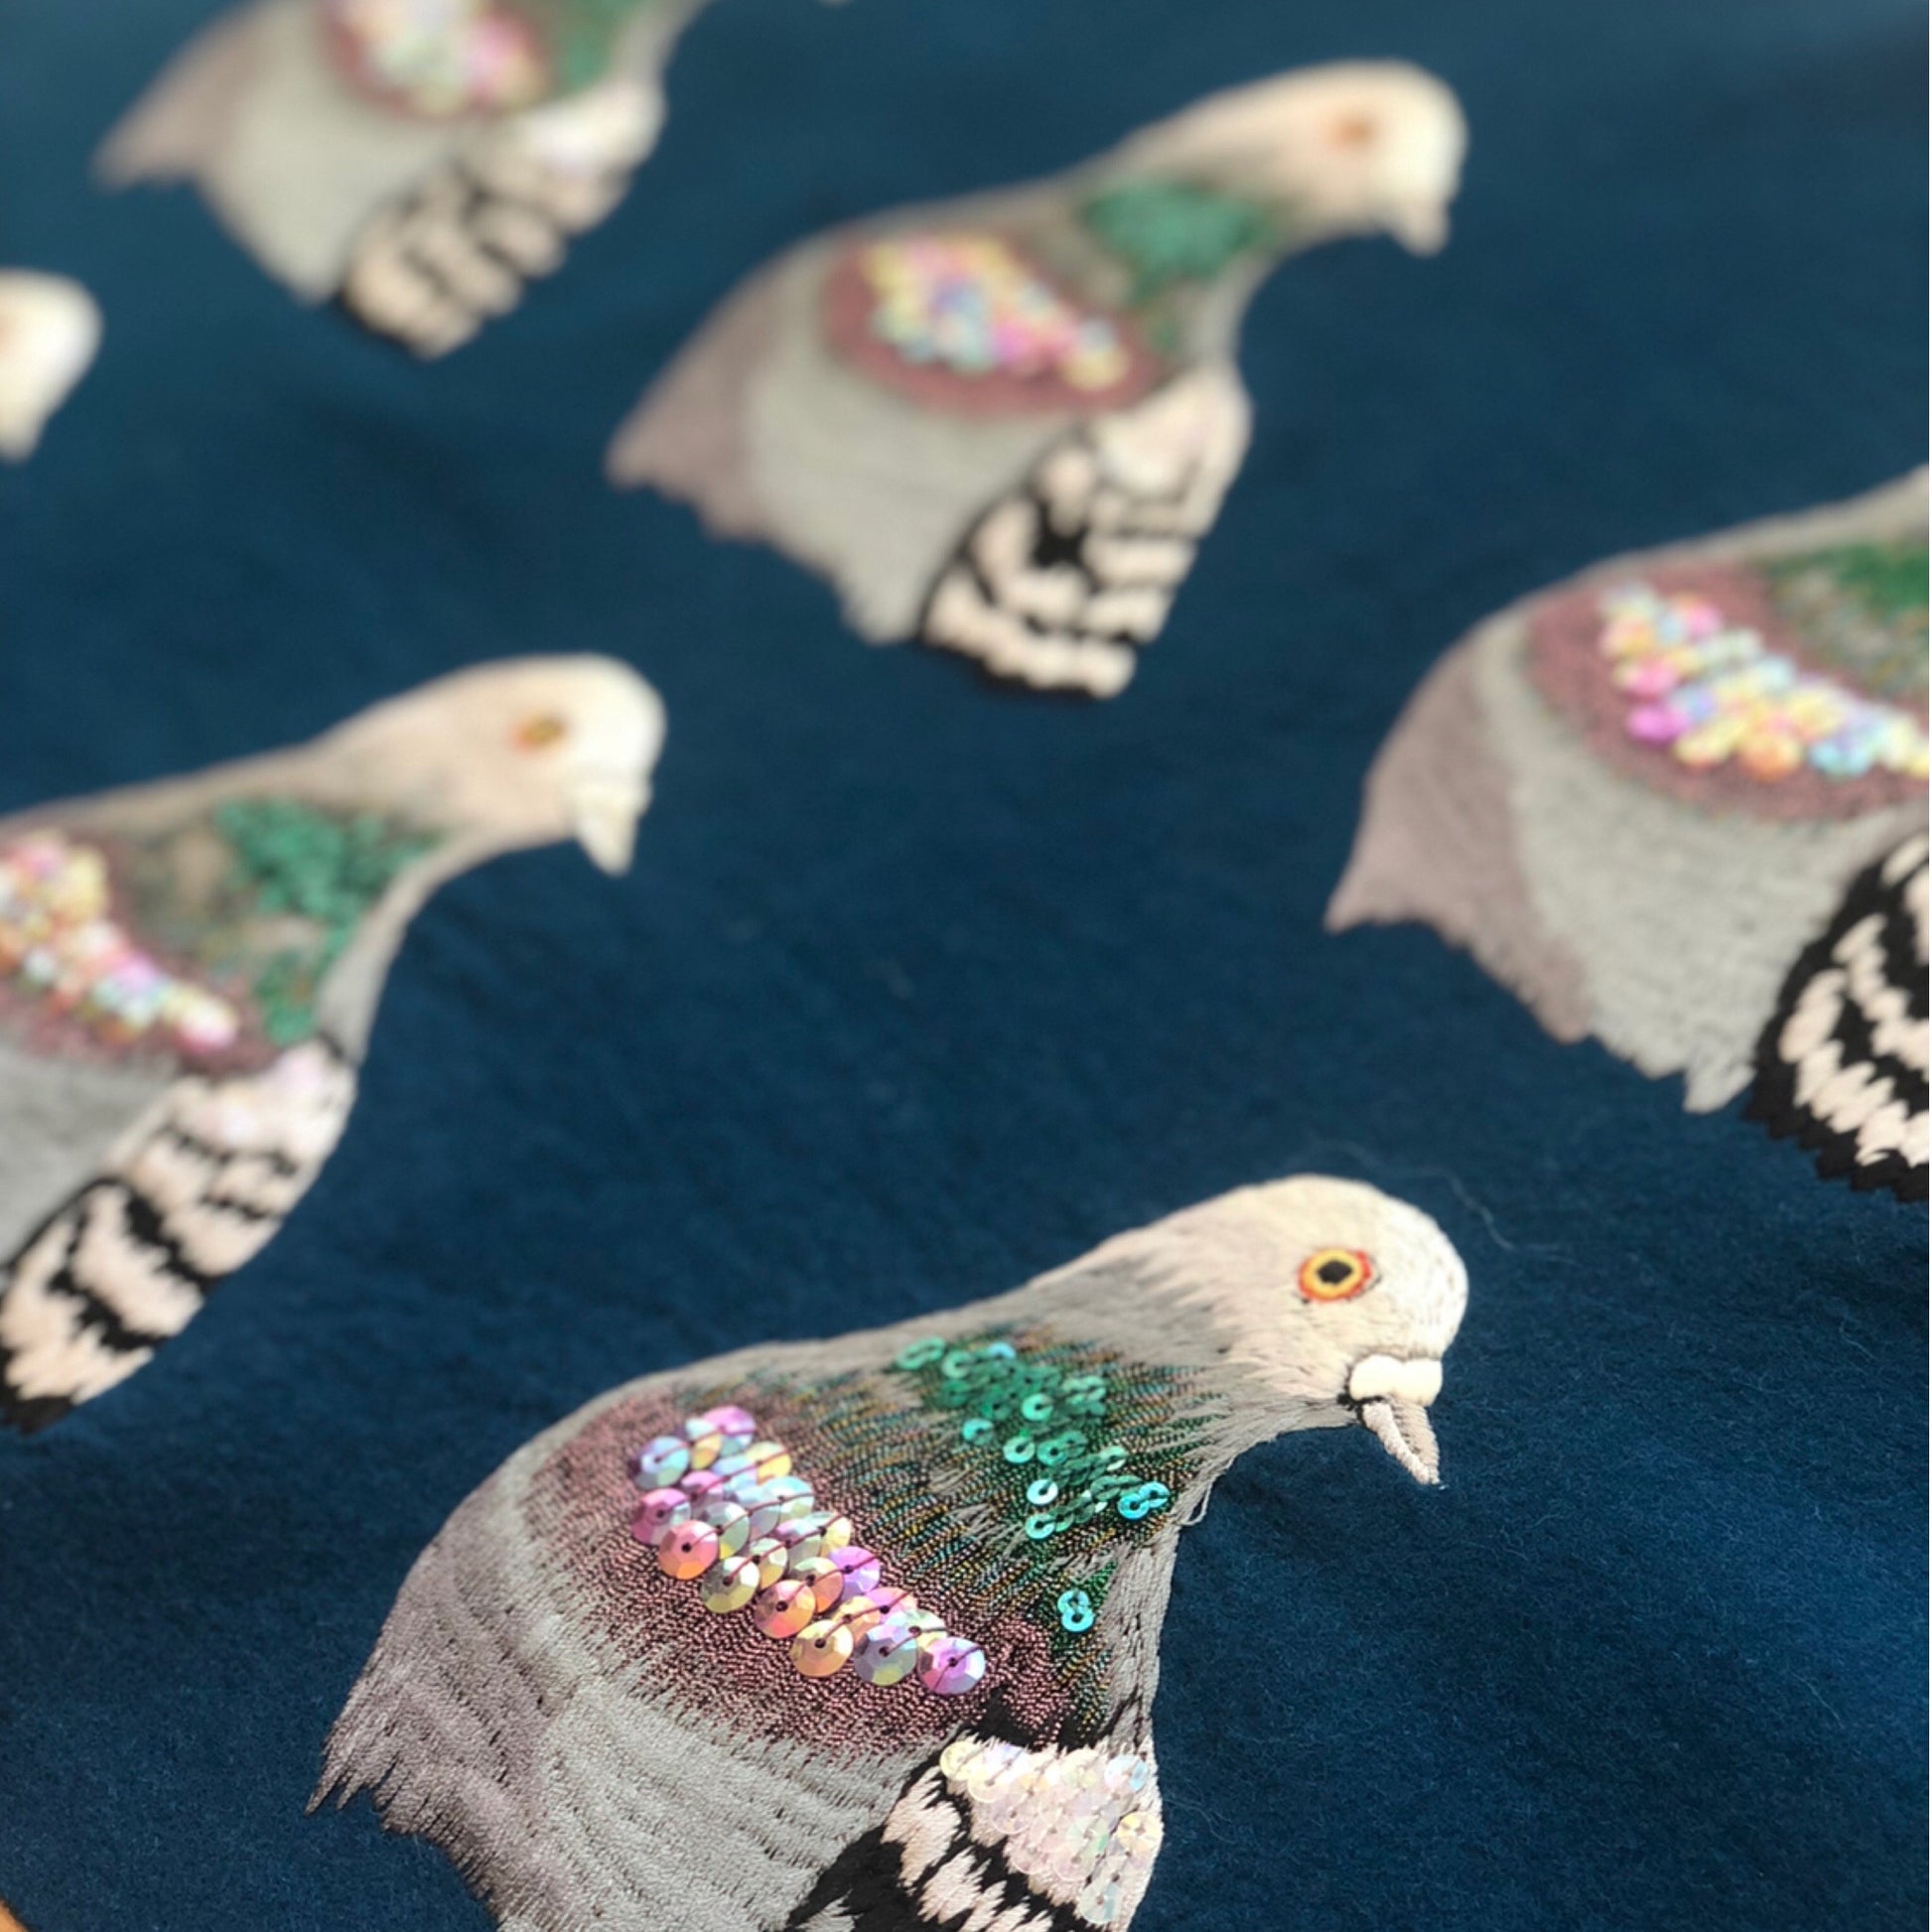 A number of pre-cut sparkly pigeon portrait's on navy felt background. The pigeons in the background are slightly out of focus with the focus being on the one in the bottom right corner